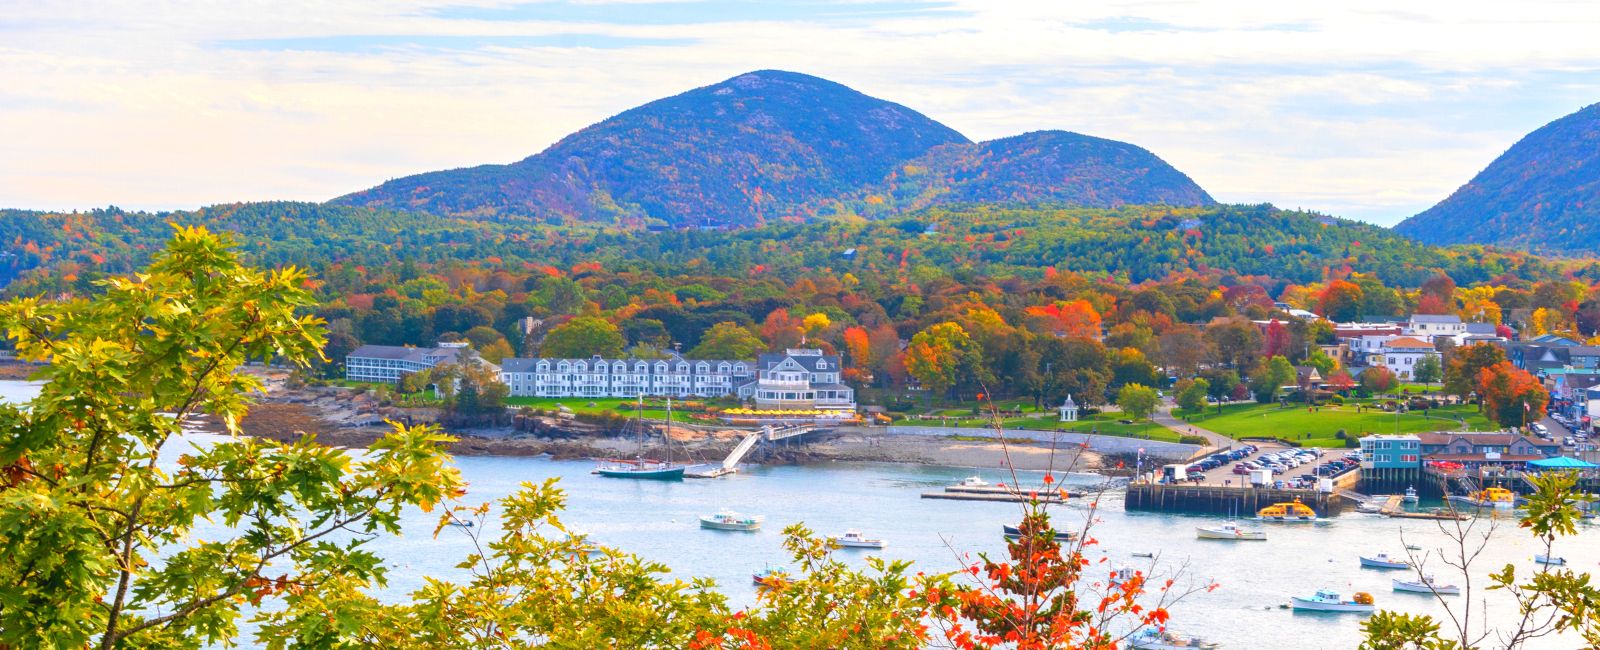 View of bar harbor maine from bar island, with trees in the foreground, then the ocean with boats, a large white building, a town off to the right, and autumn trees and mountains in the background